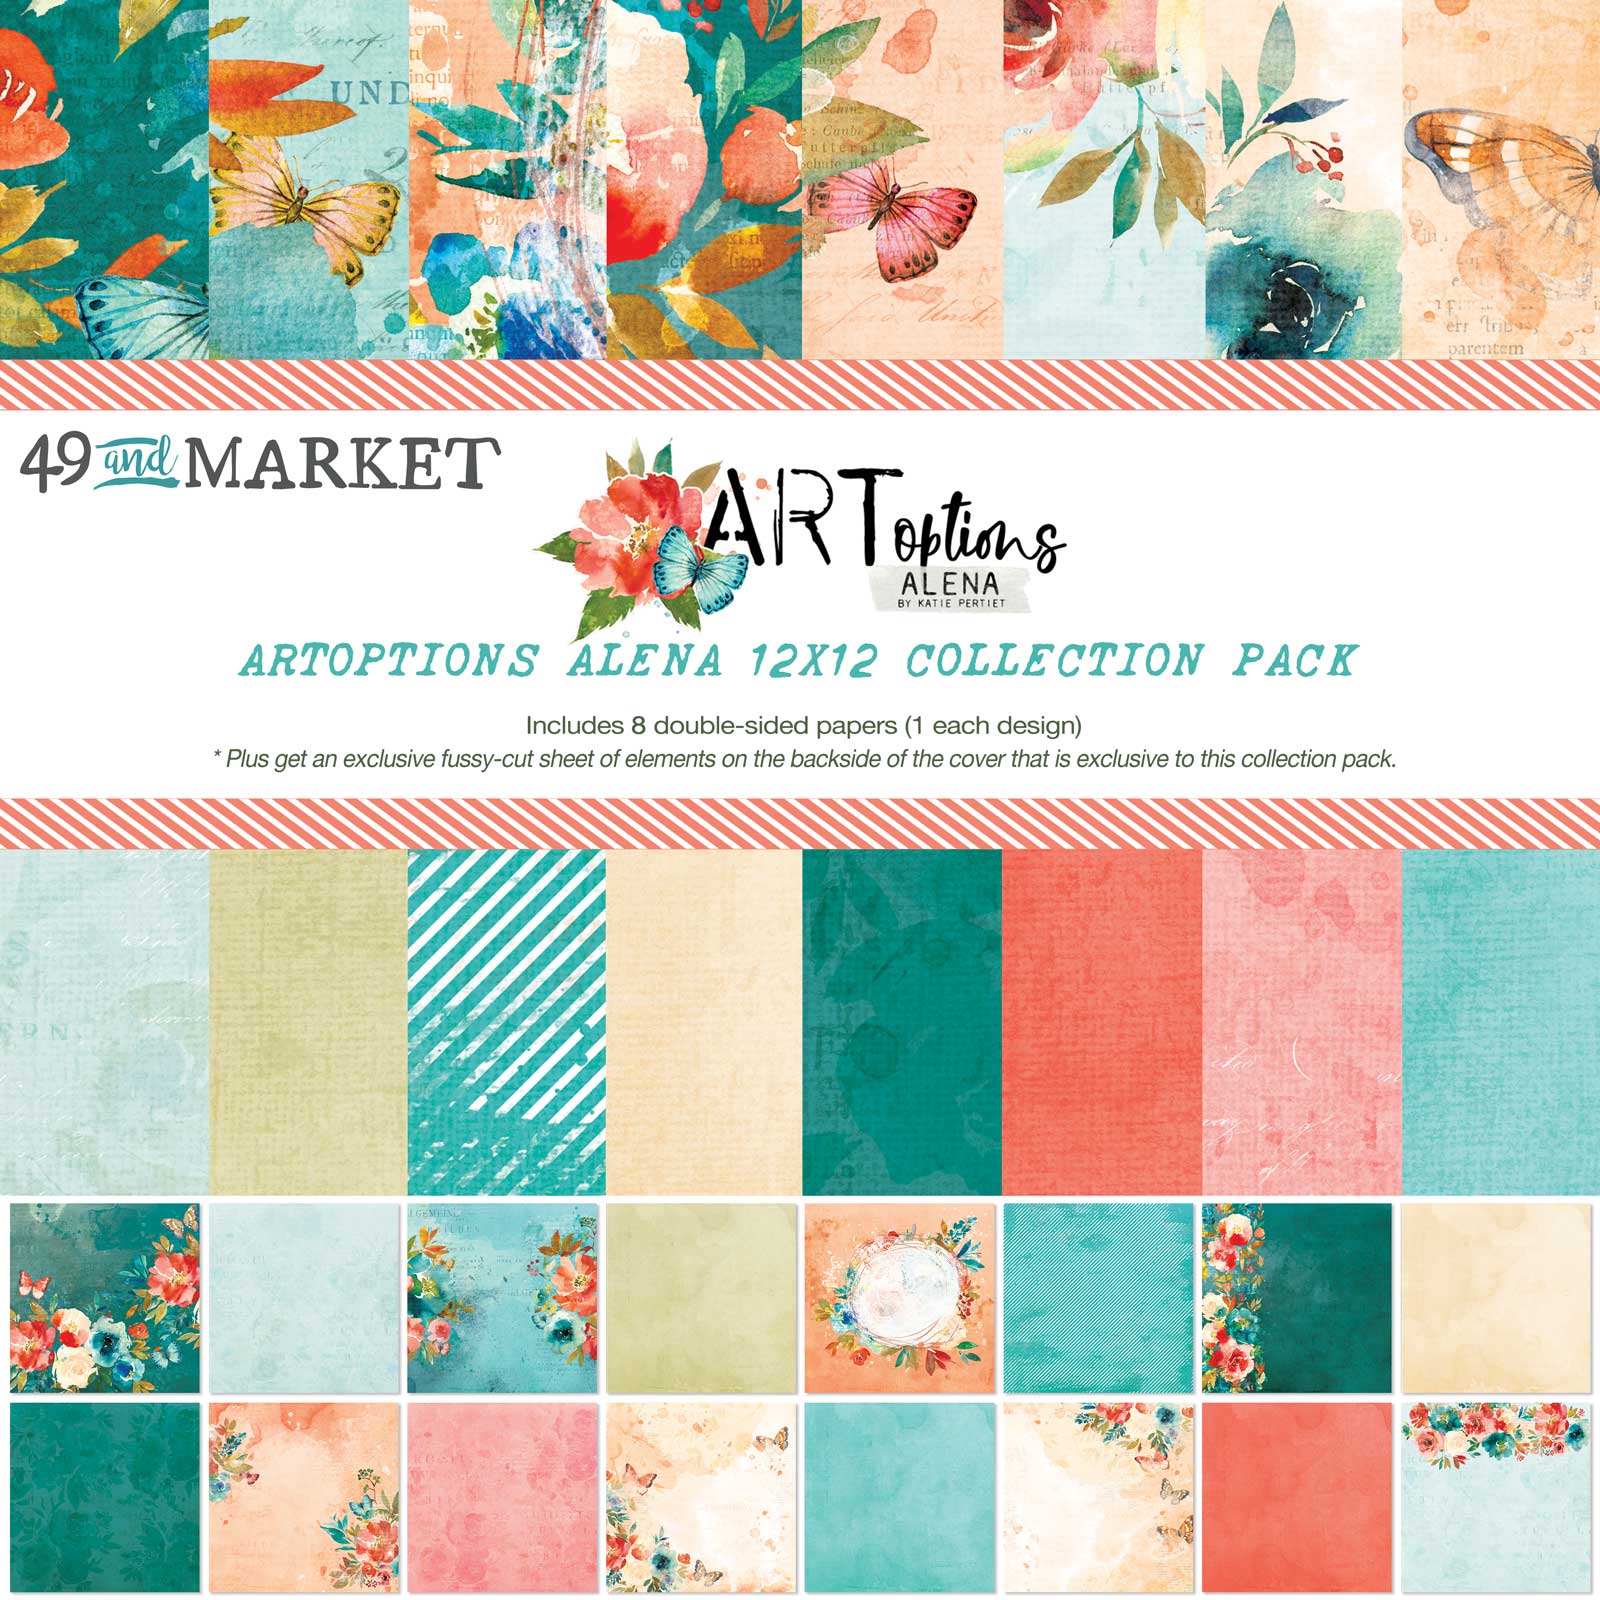 49 and Market  Art Options - Alena  12 x 12 paper collection